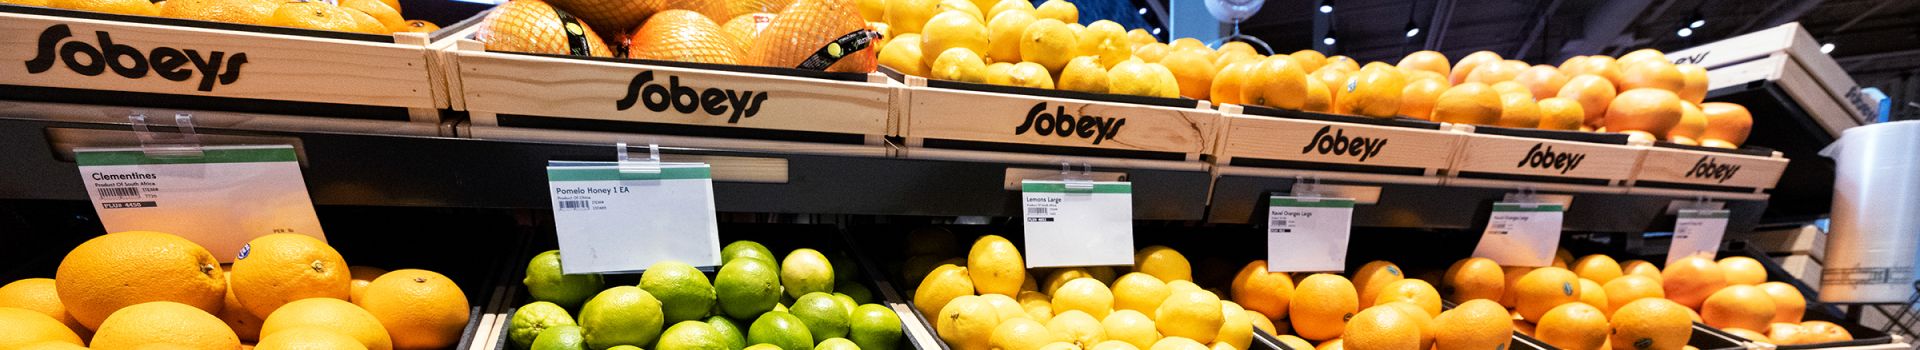 A grocery store display with wooden bins labeled "Sobeys," holding a variety of citrus fruits including oranges, lemons, and limes.